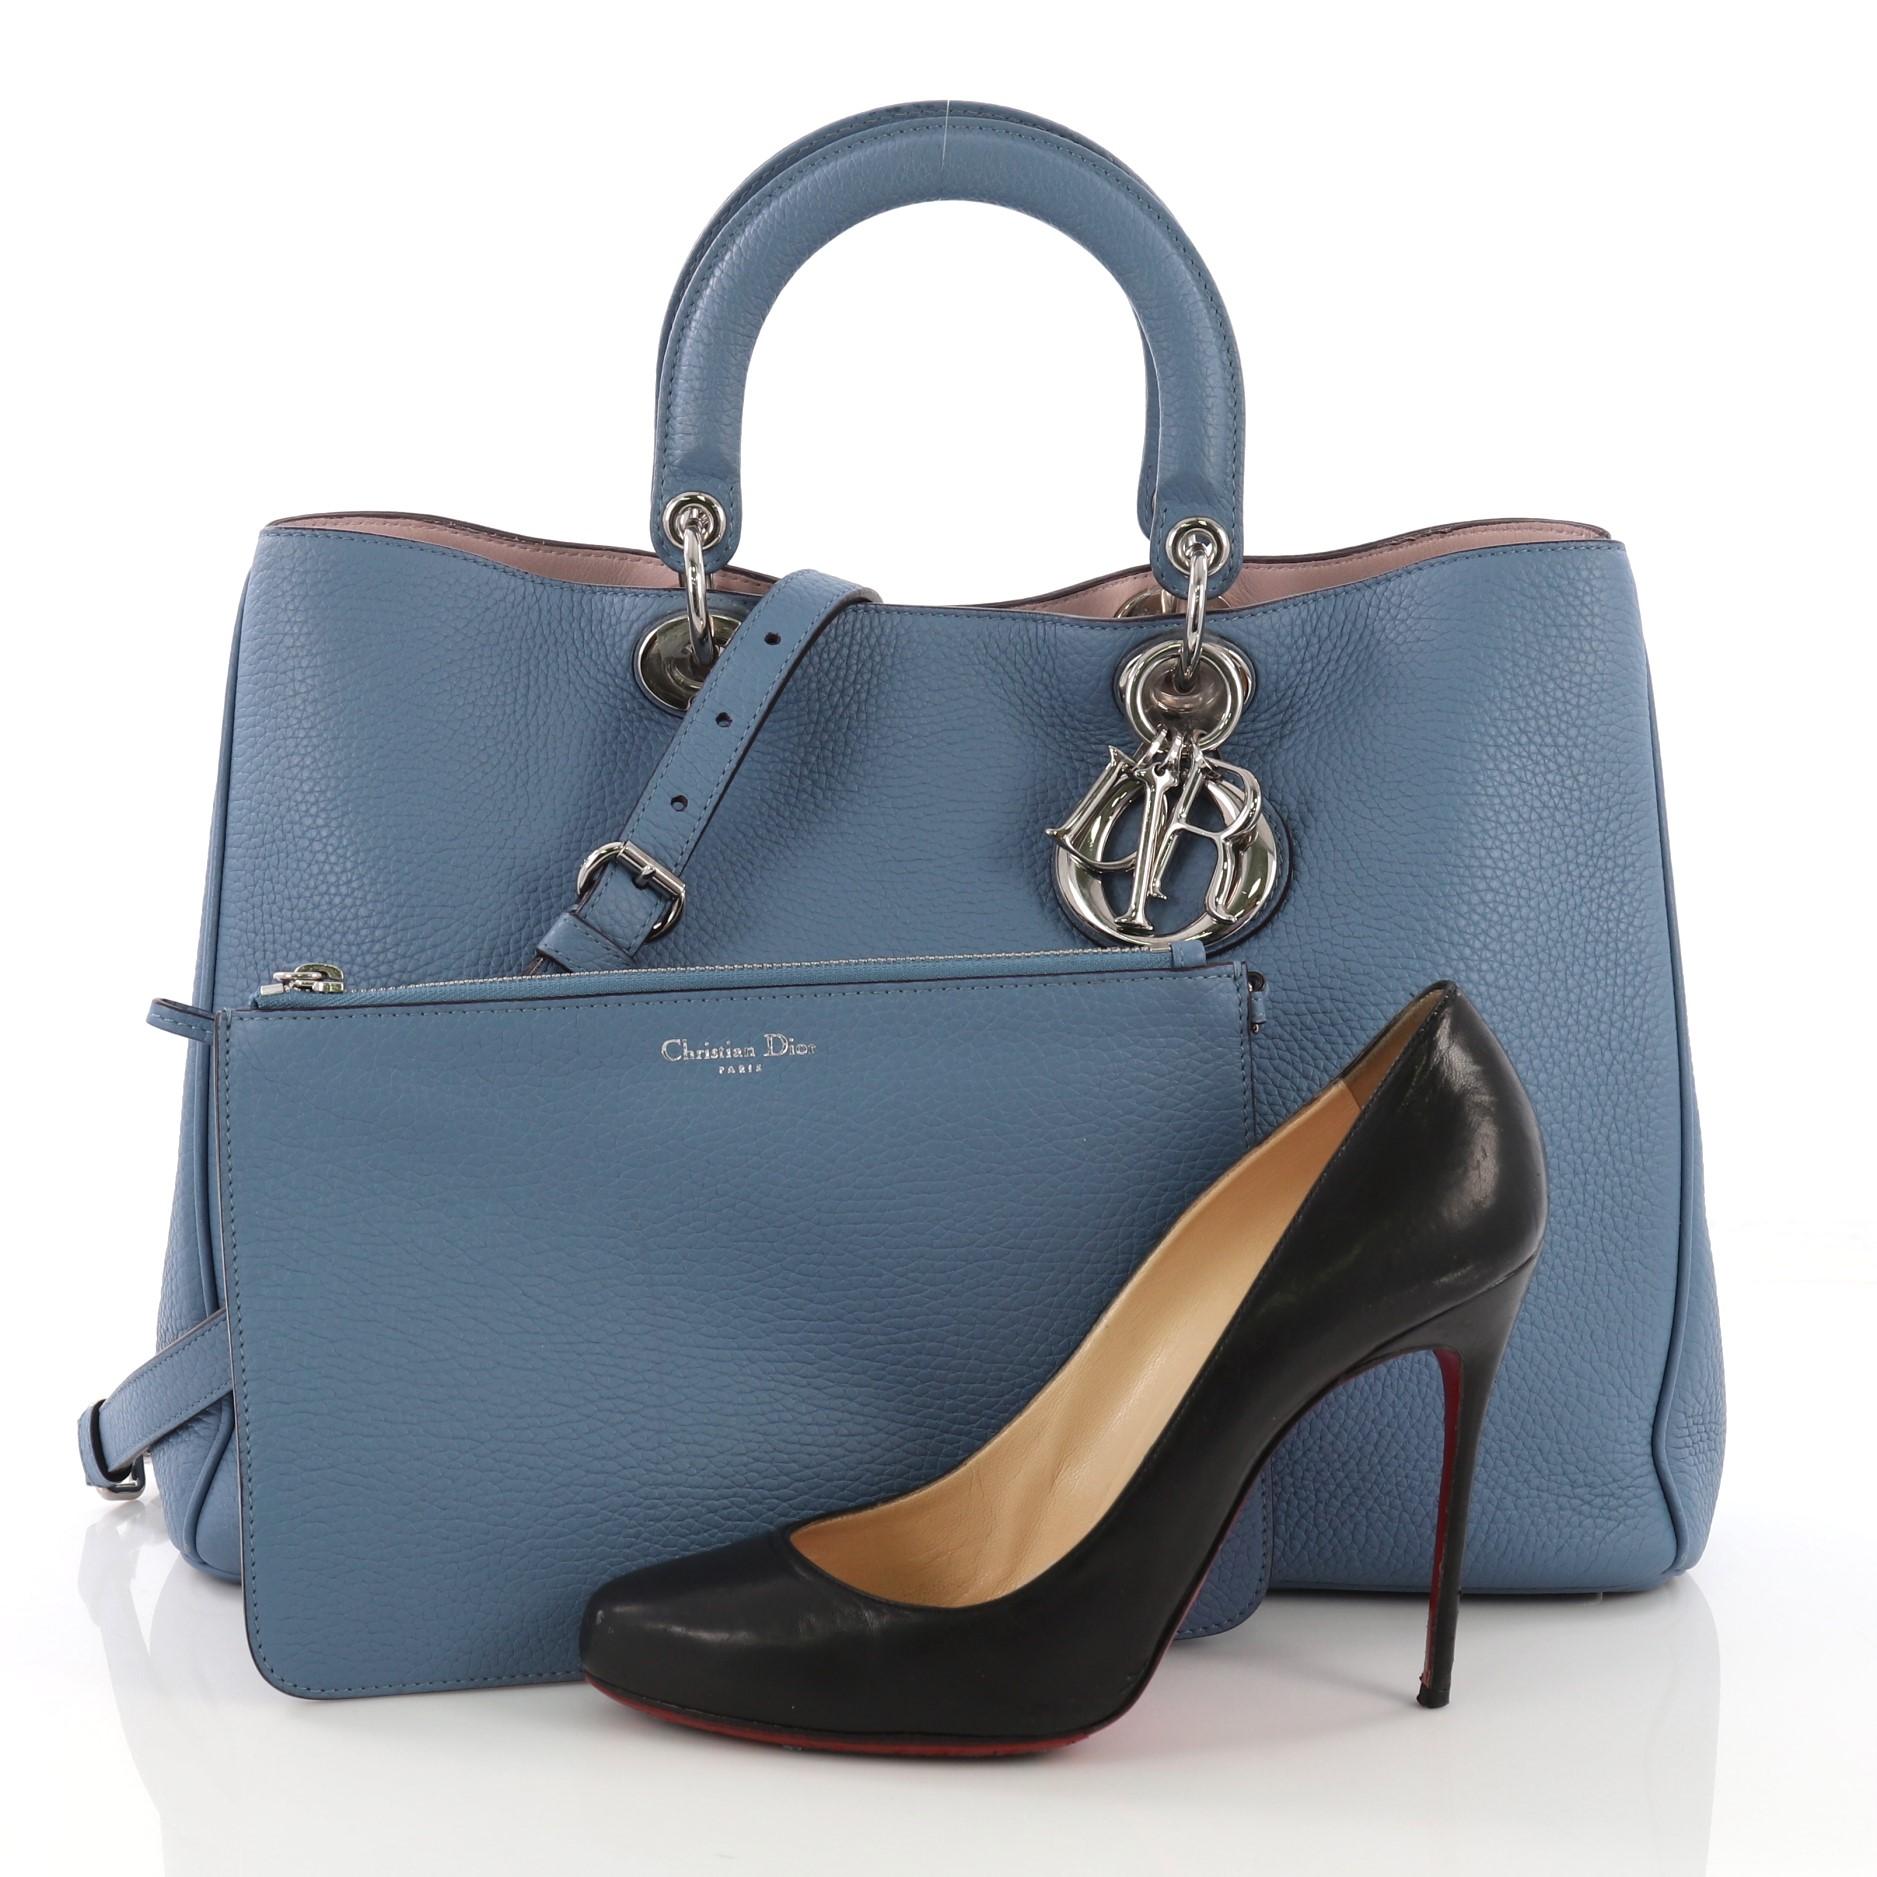 This Christian Dior Diorissimo Tote Pebbled Leather Large, crafted from blue pebbled leather, features smooth short dual handles with sleek Dior charms, side snap buttons, and silver-tone hardware. Its magnetic snap closure opens to a lavendar